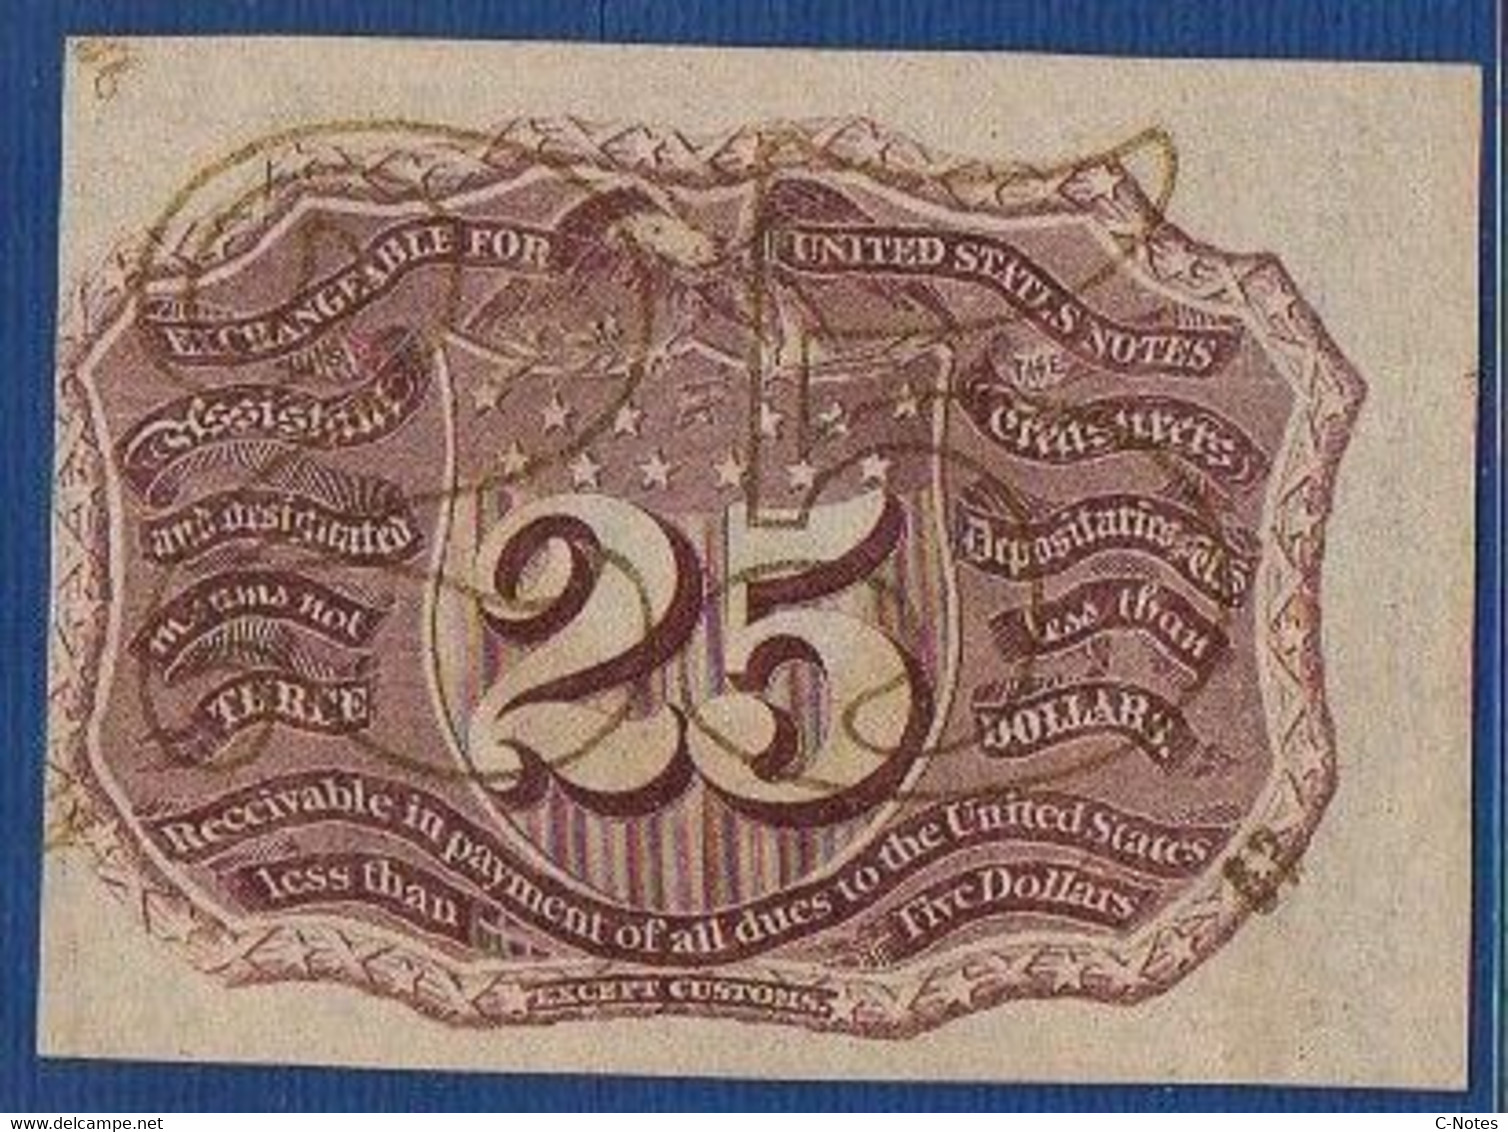 UNITED STATES OF AMERICA - P.103 – 10 Cents 1863 AUNC, No Serial Number - 1863 : 2° Issue